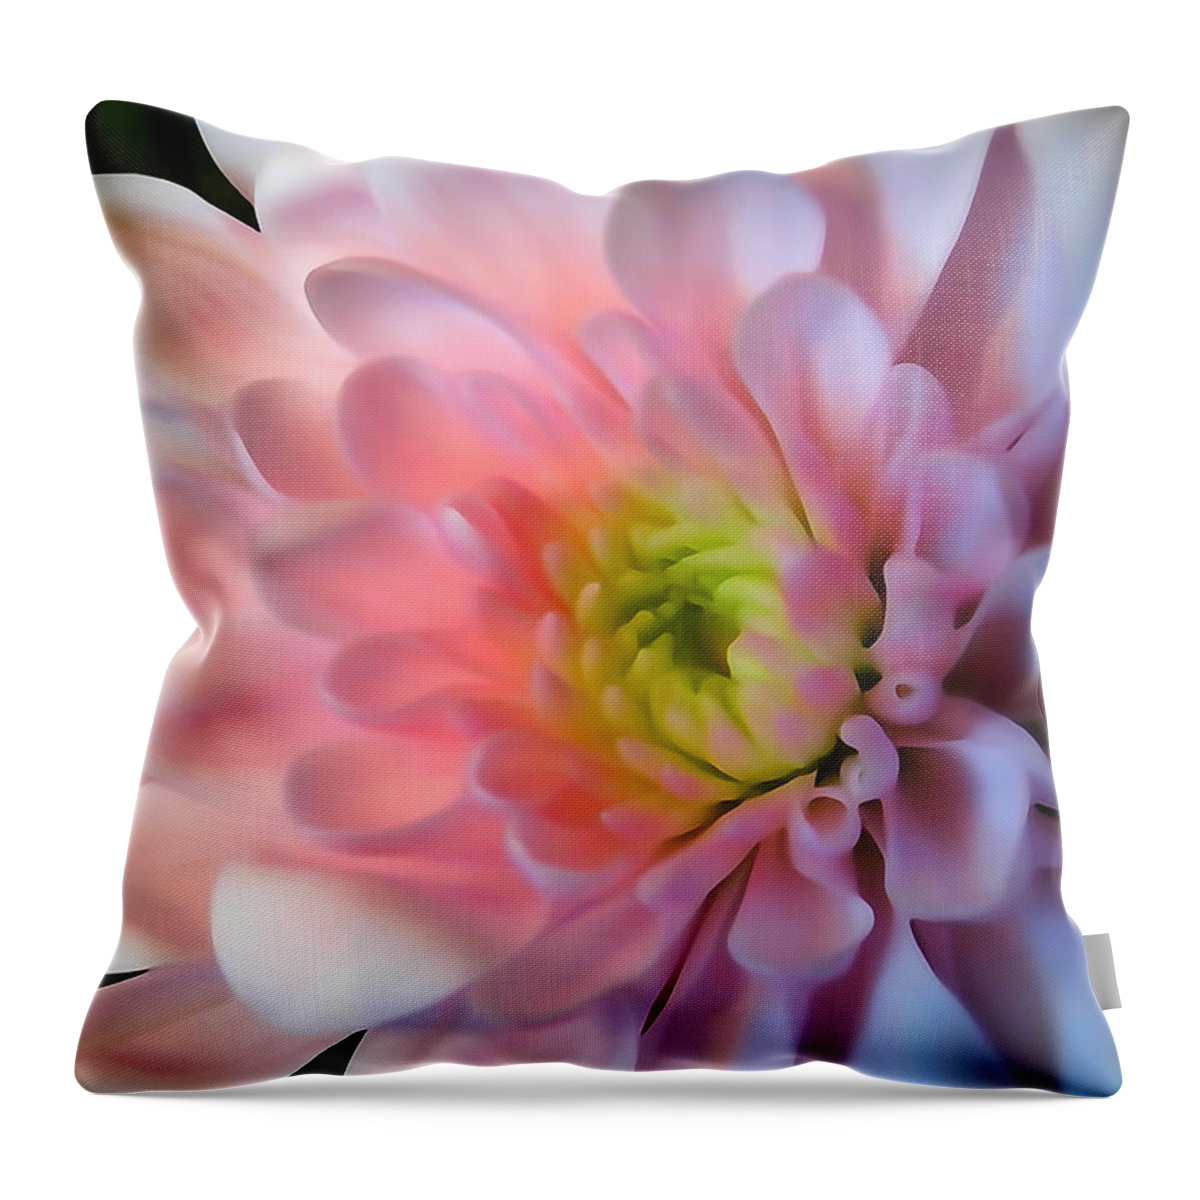 Flower Throw Pillow featuring the photograph Soft Petals by David T Wilkinson